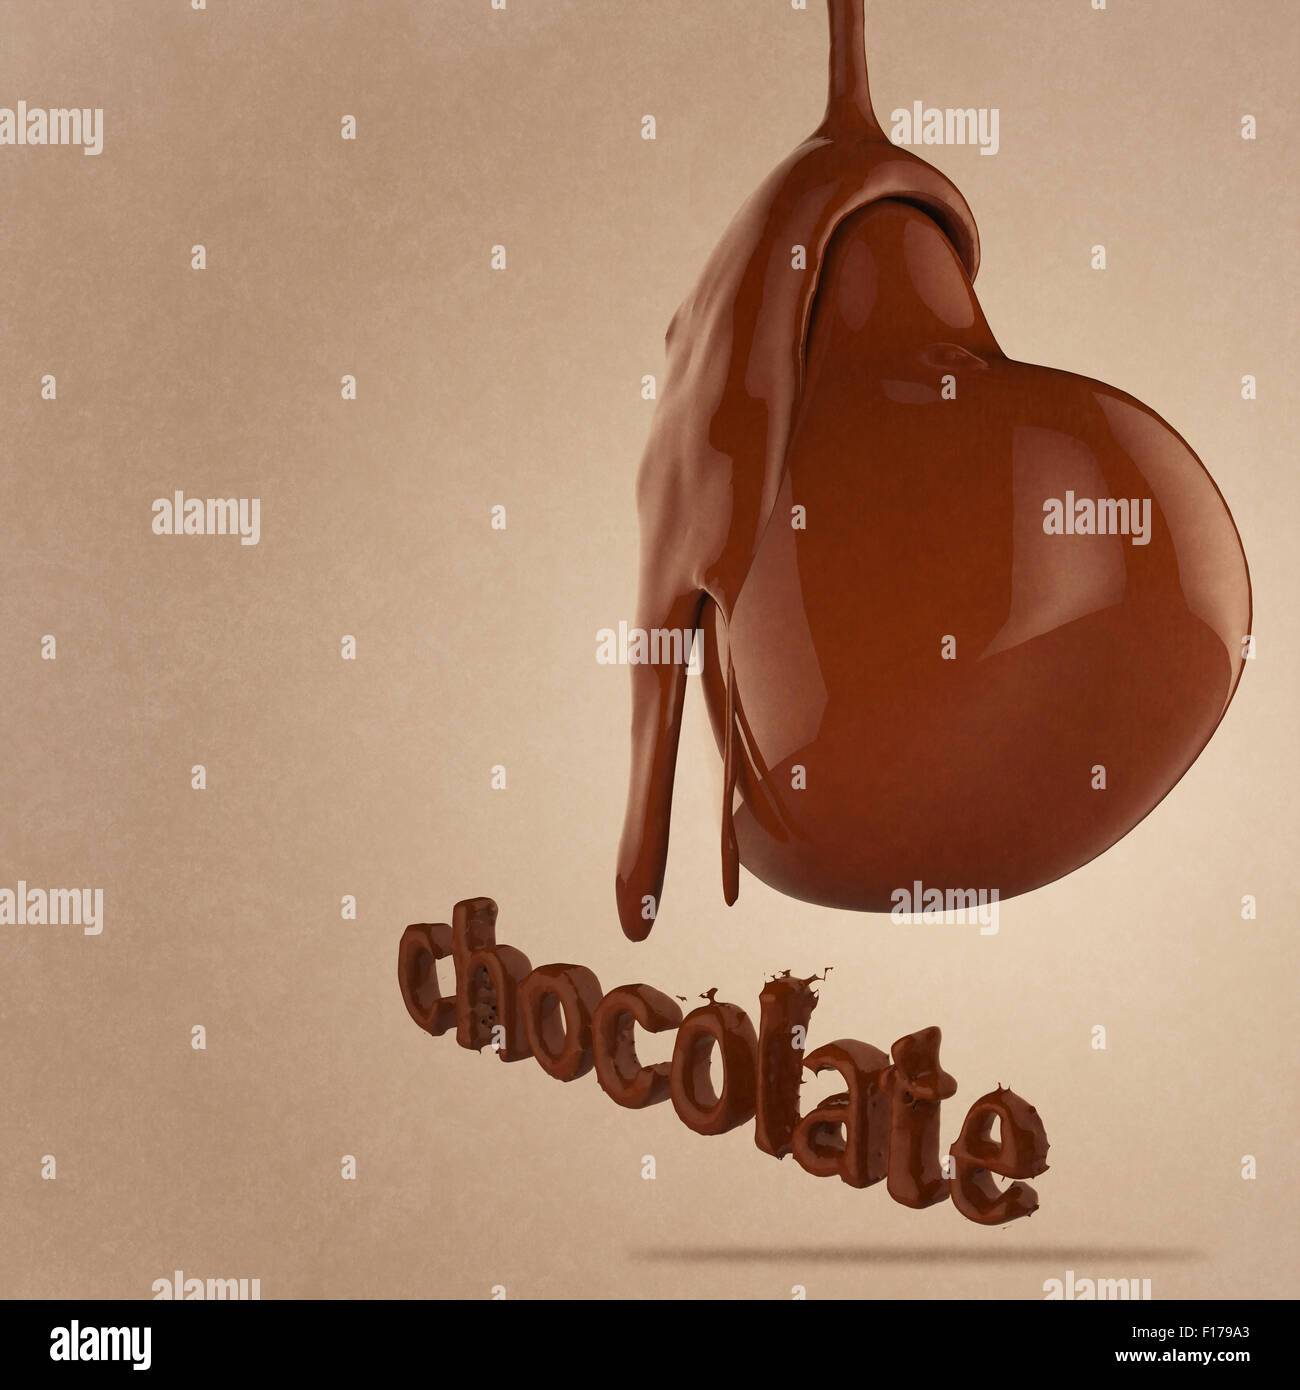 Chocolate flow on heart shape as vintage style concept Stock Photo